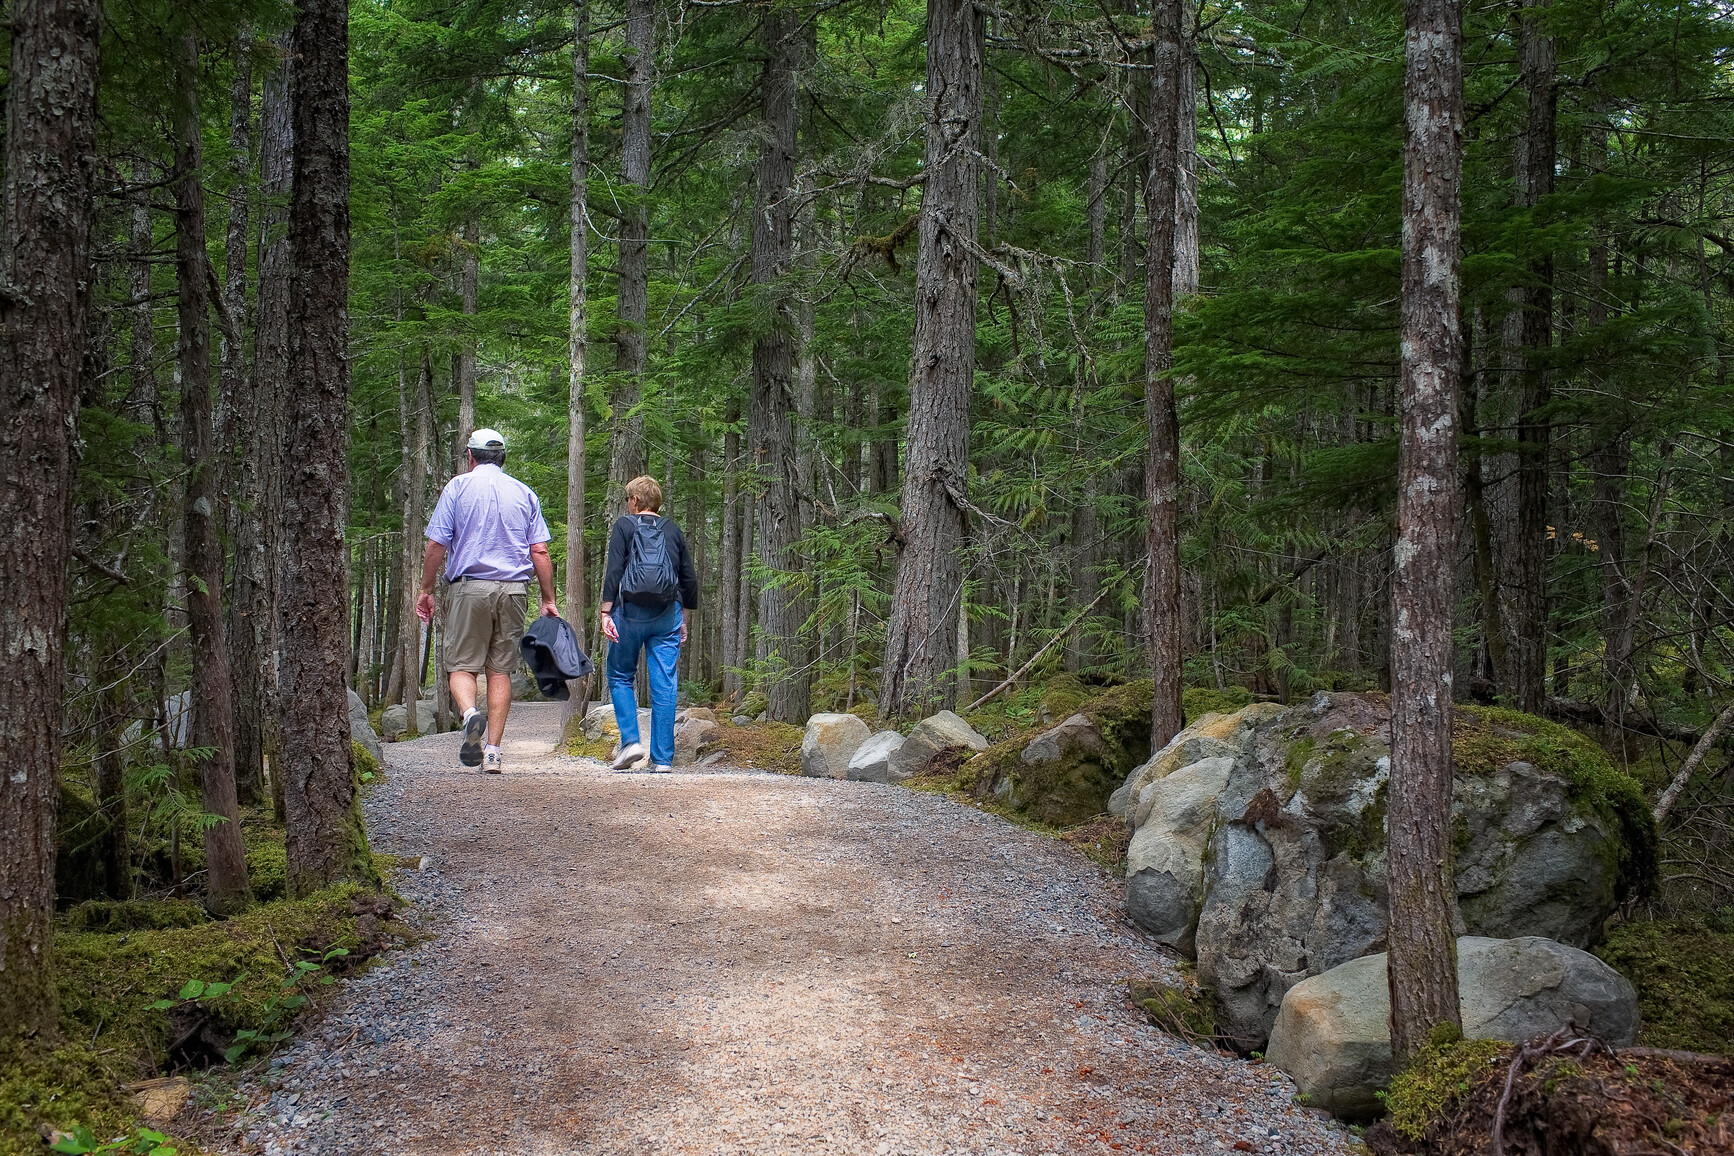 Park visitors walking down a path through the forest.